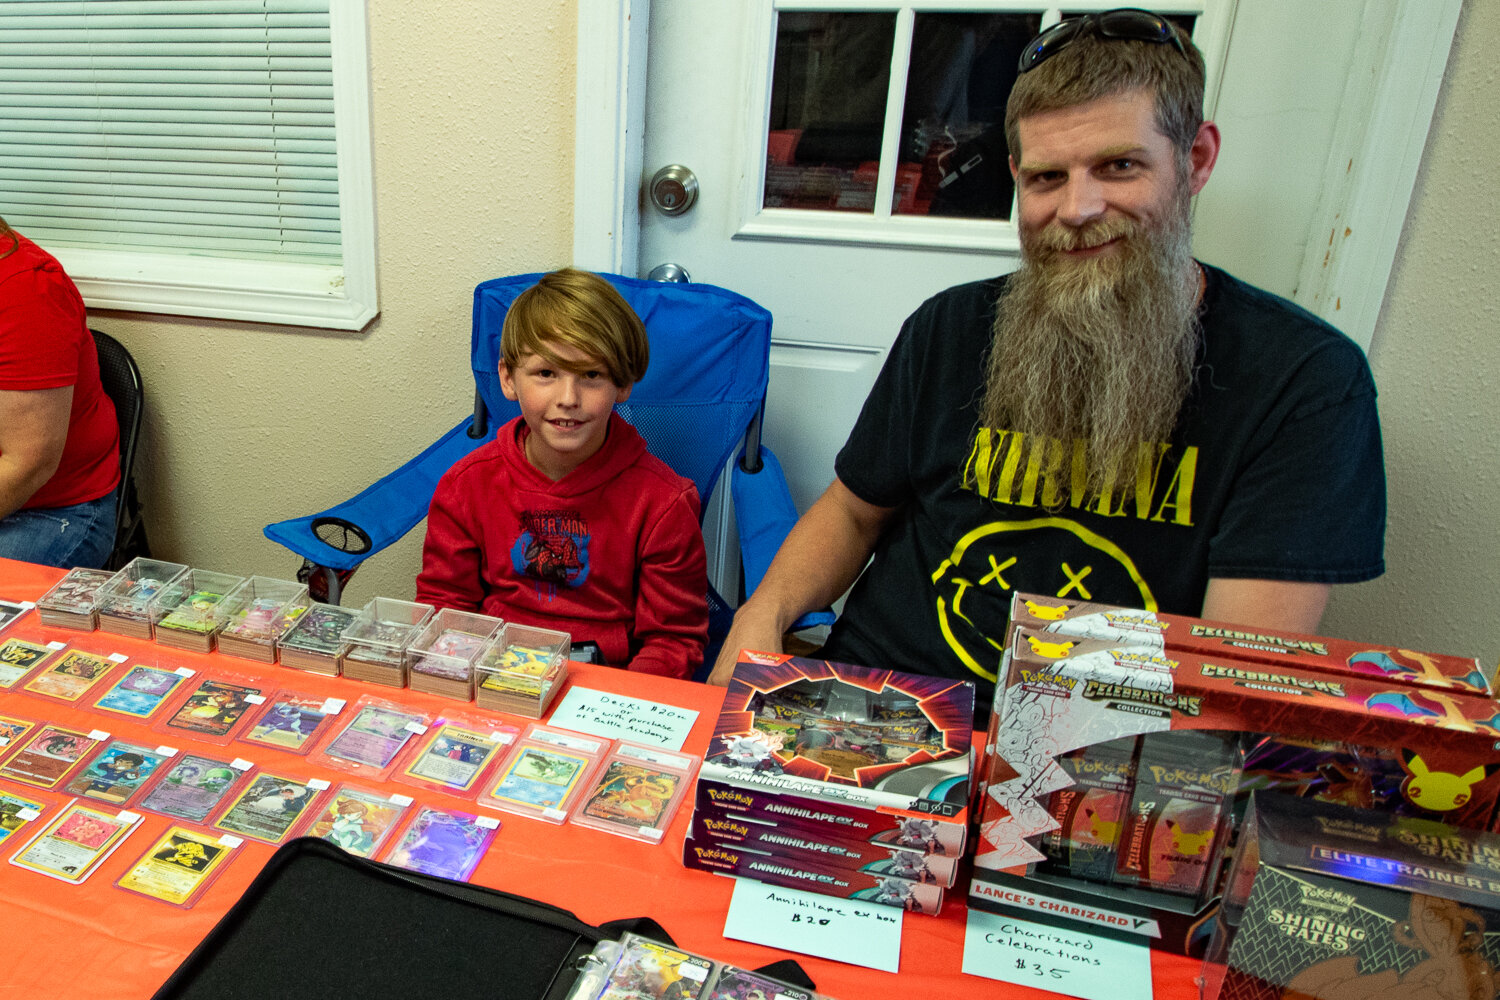 From right, Travis and Jackson Gardner, of Chehalis, sit behind their table selling Pokémon cards at the inaugural Keiper's Cards and Memorabilia Show on Sept. 2.